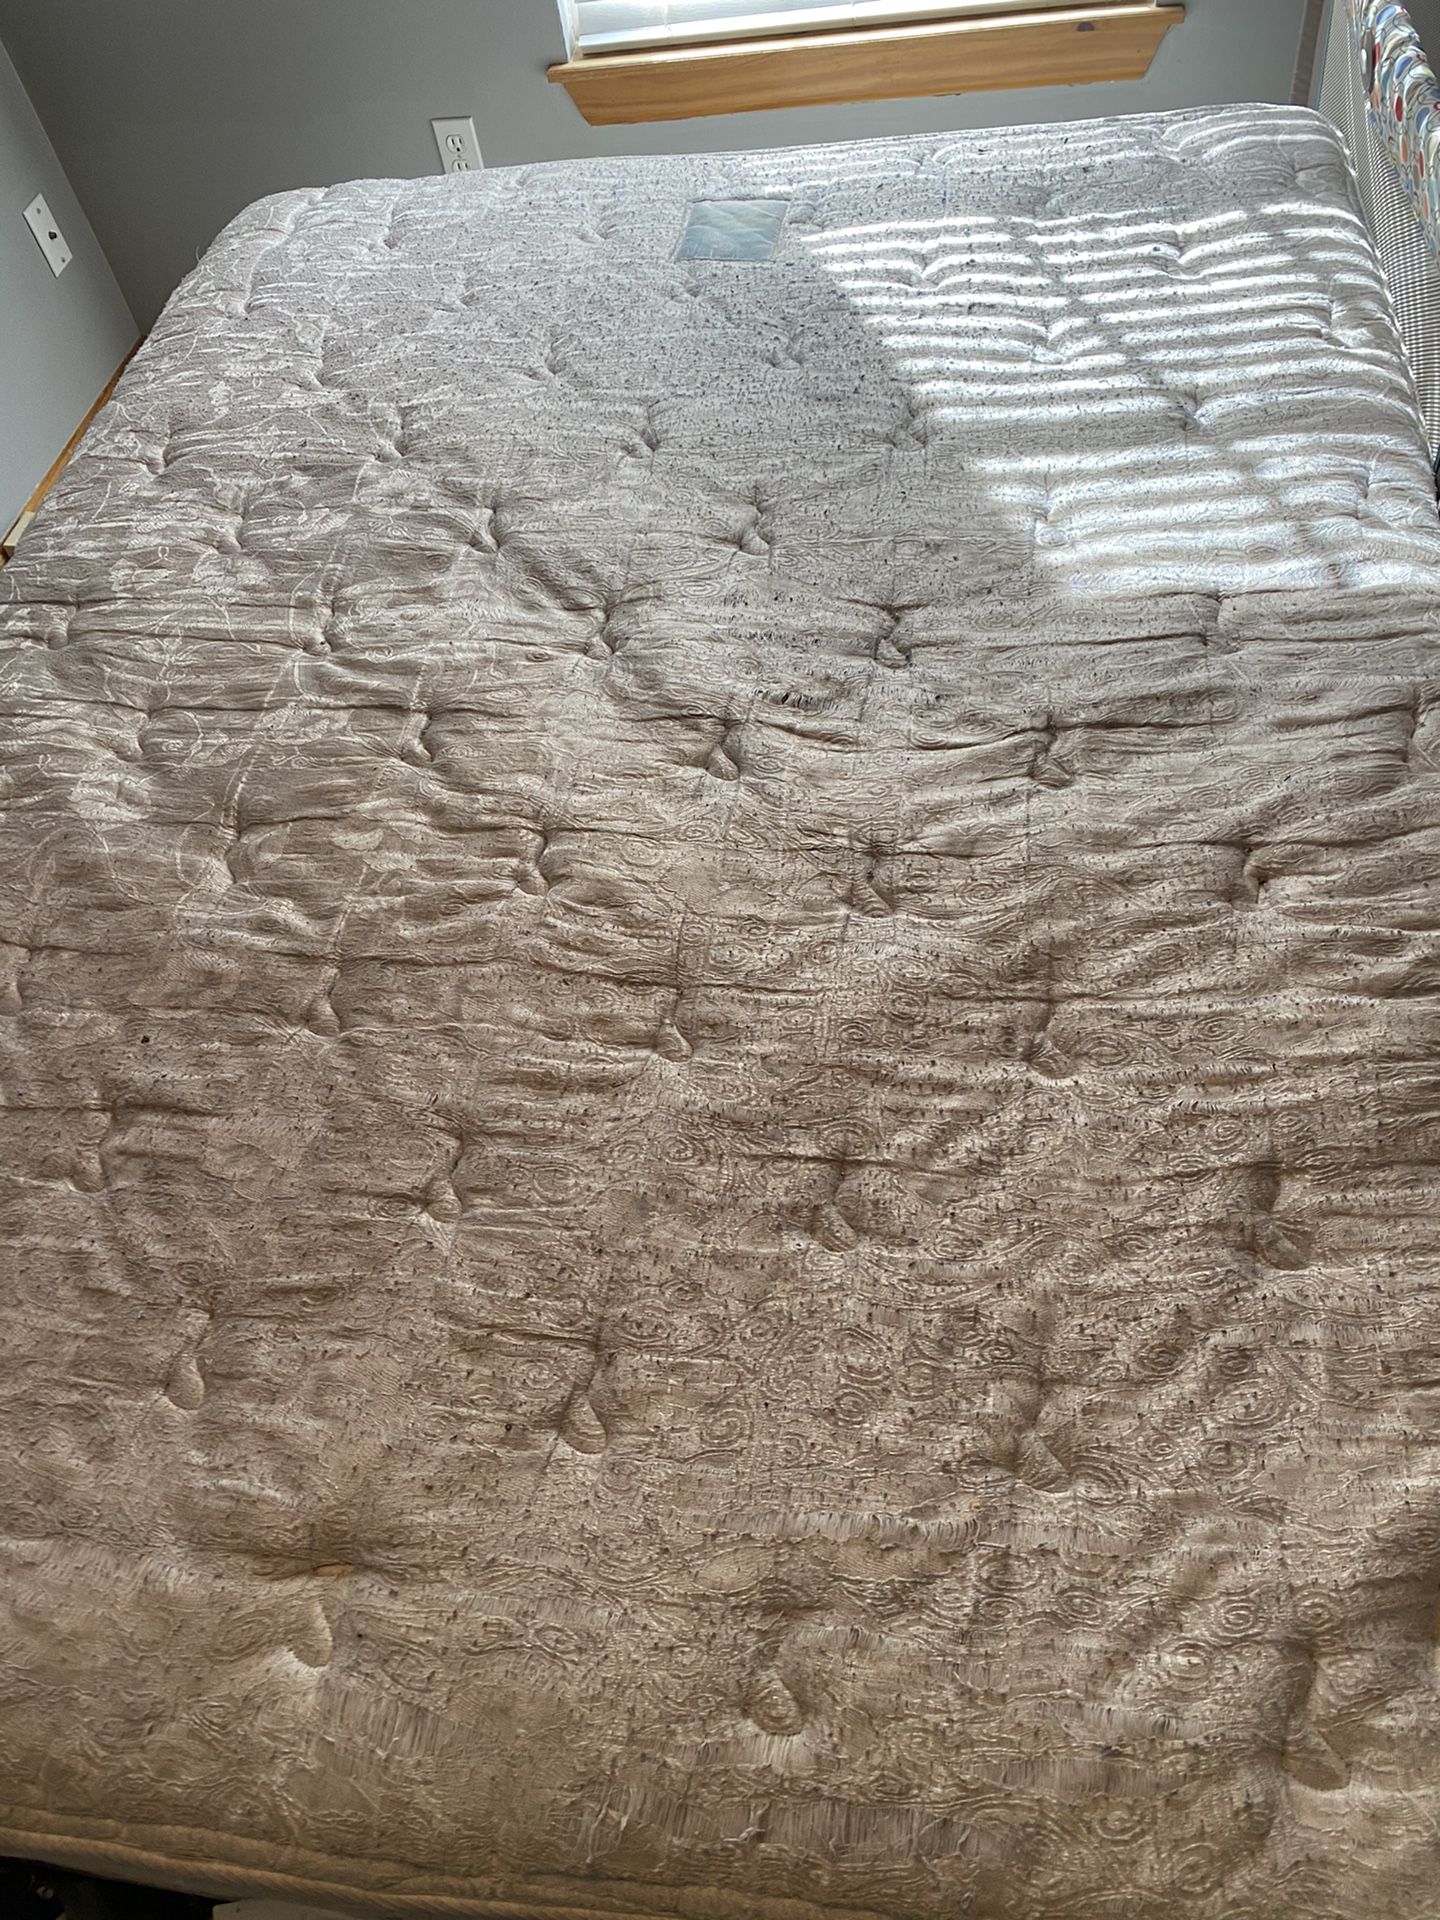 Free Queen mattress and box spring used